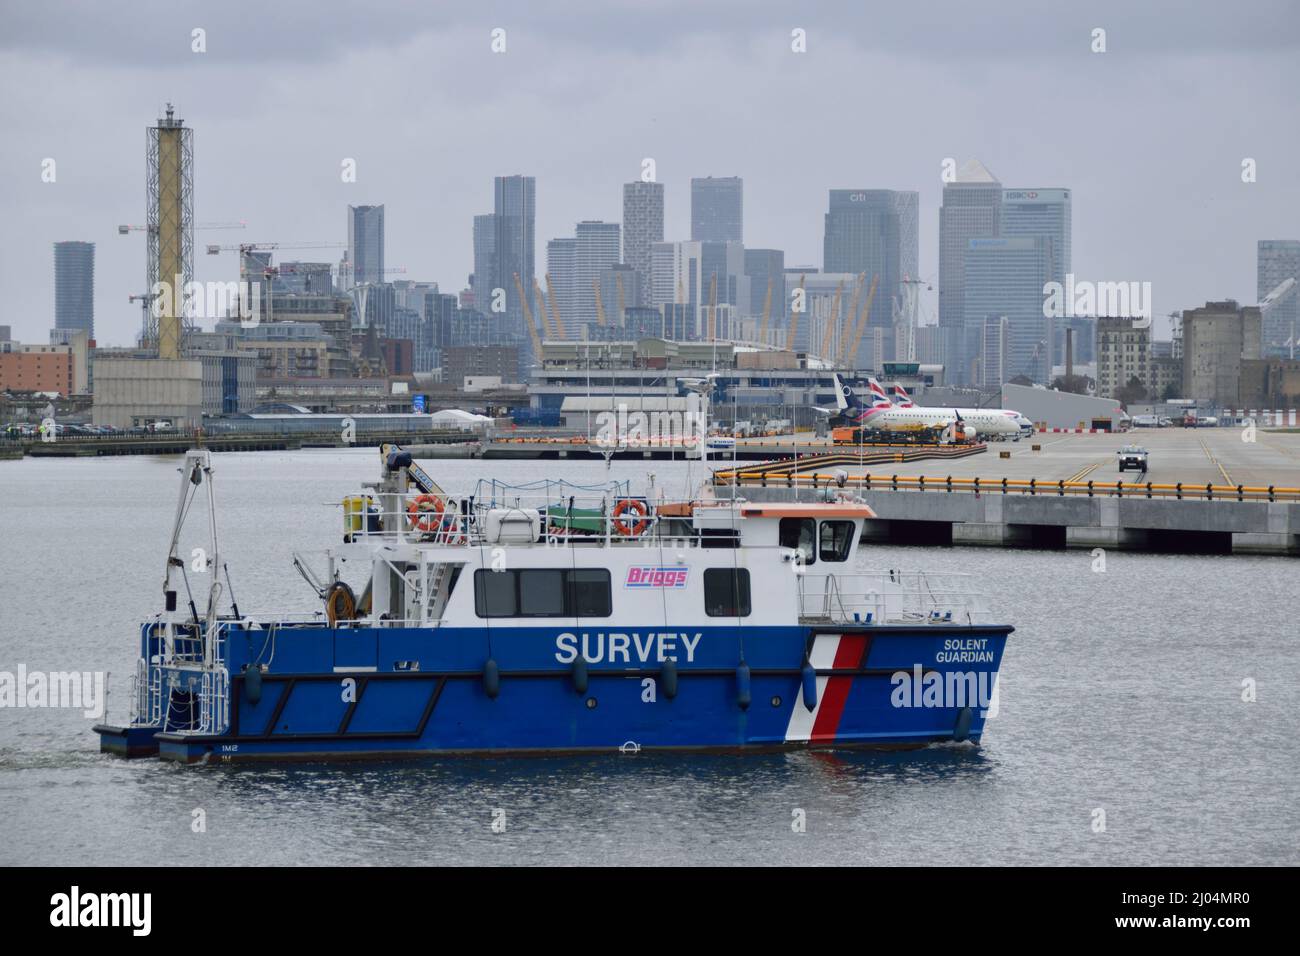 Briggs Marine's survey vessel SOLENT GUARDIAN passing through the KGV Dock in East London prior to attending the Oceanology International trade event Stock Photo